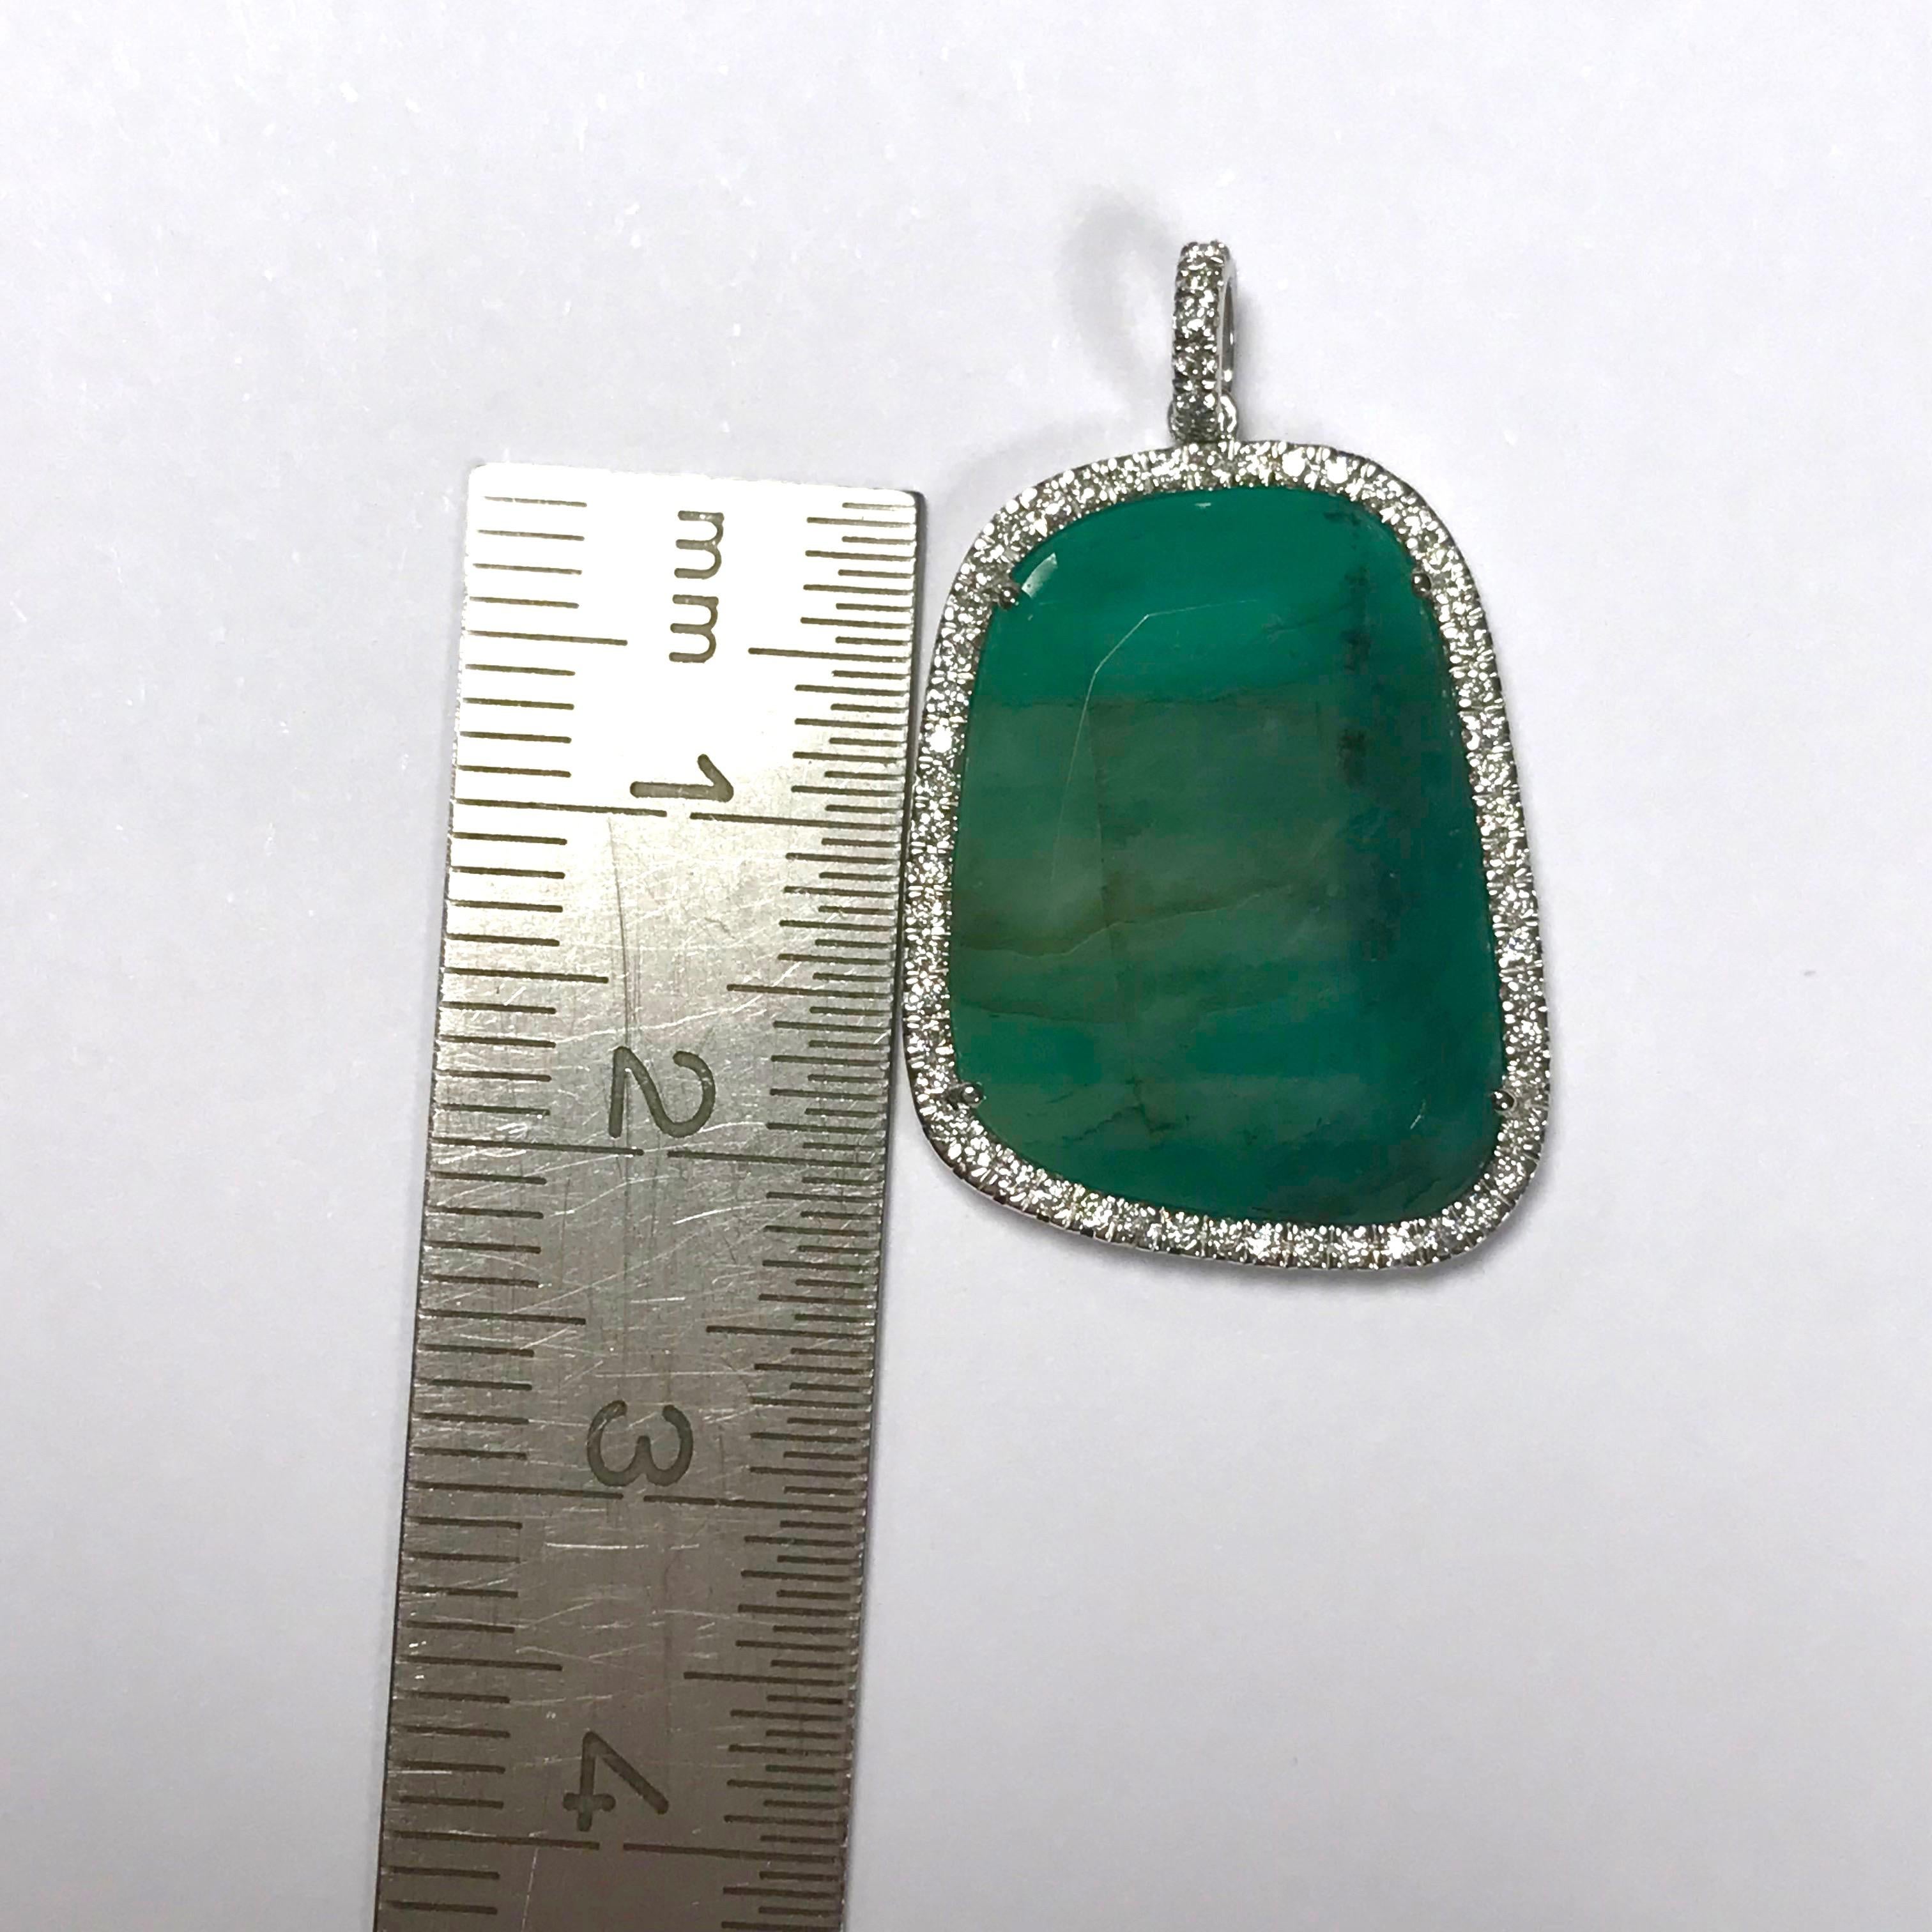 Discover this Emerald and White Diamonds on White Gold 18 Karat Pendant.
Emerald 11.78K
64 White Diamonds Form B 0.34K Color G
White Gold 18K  